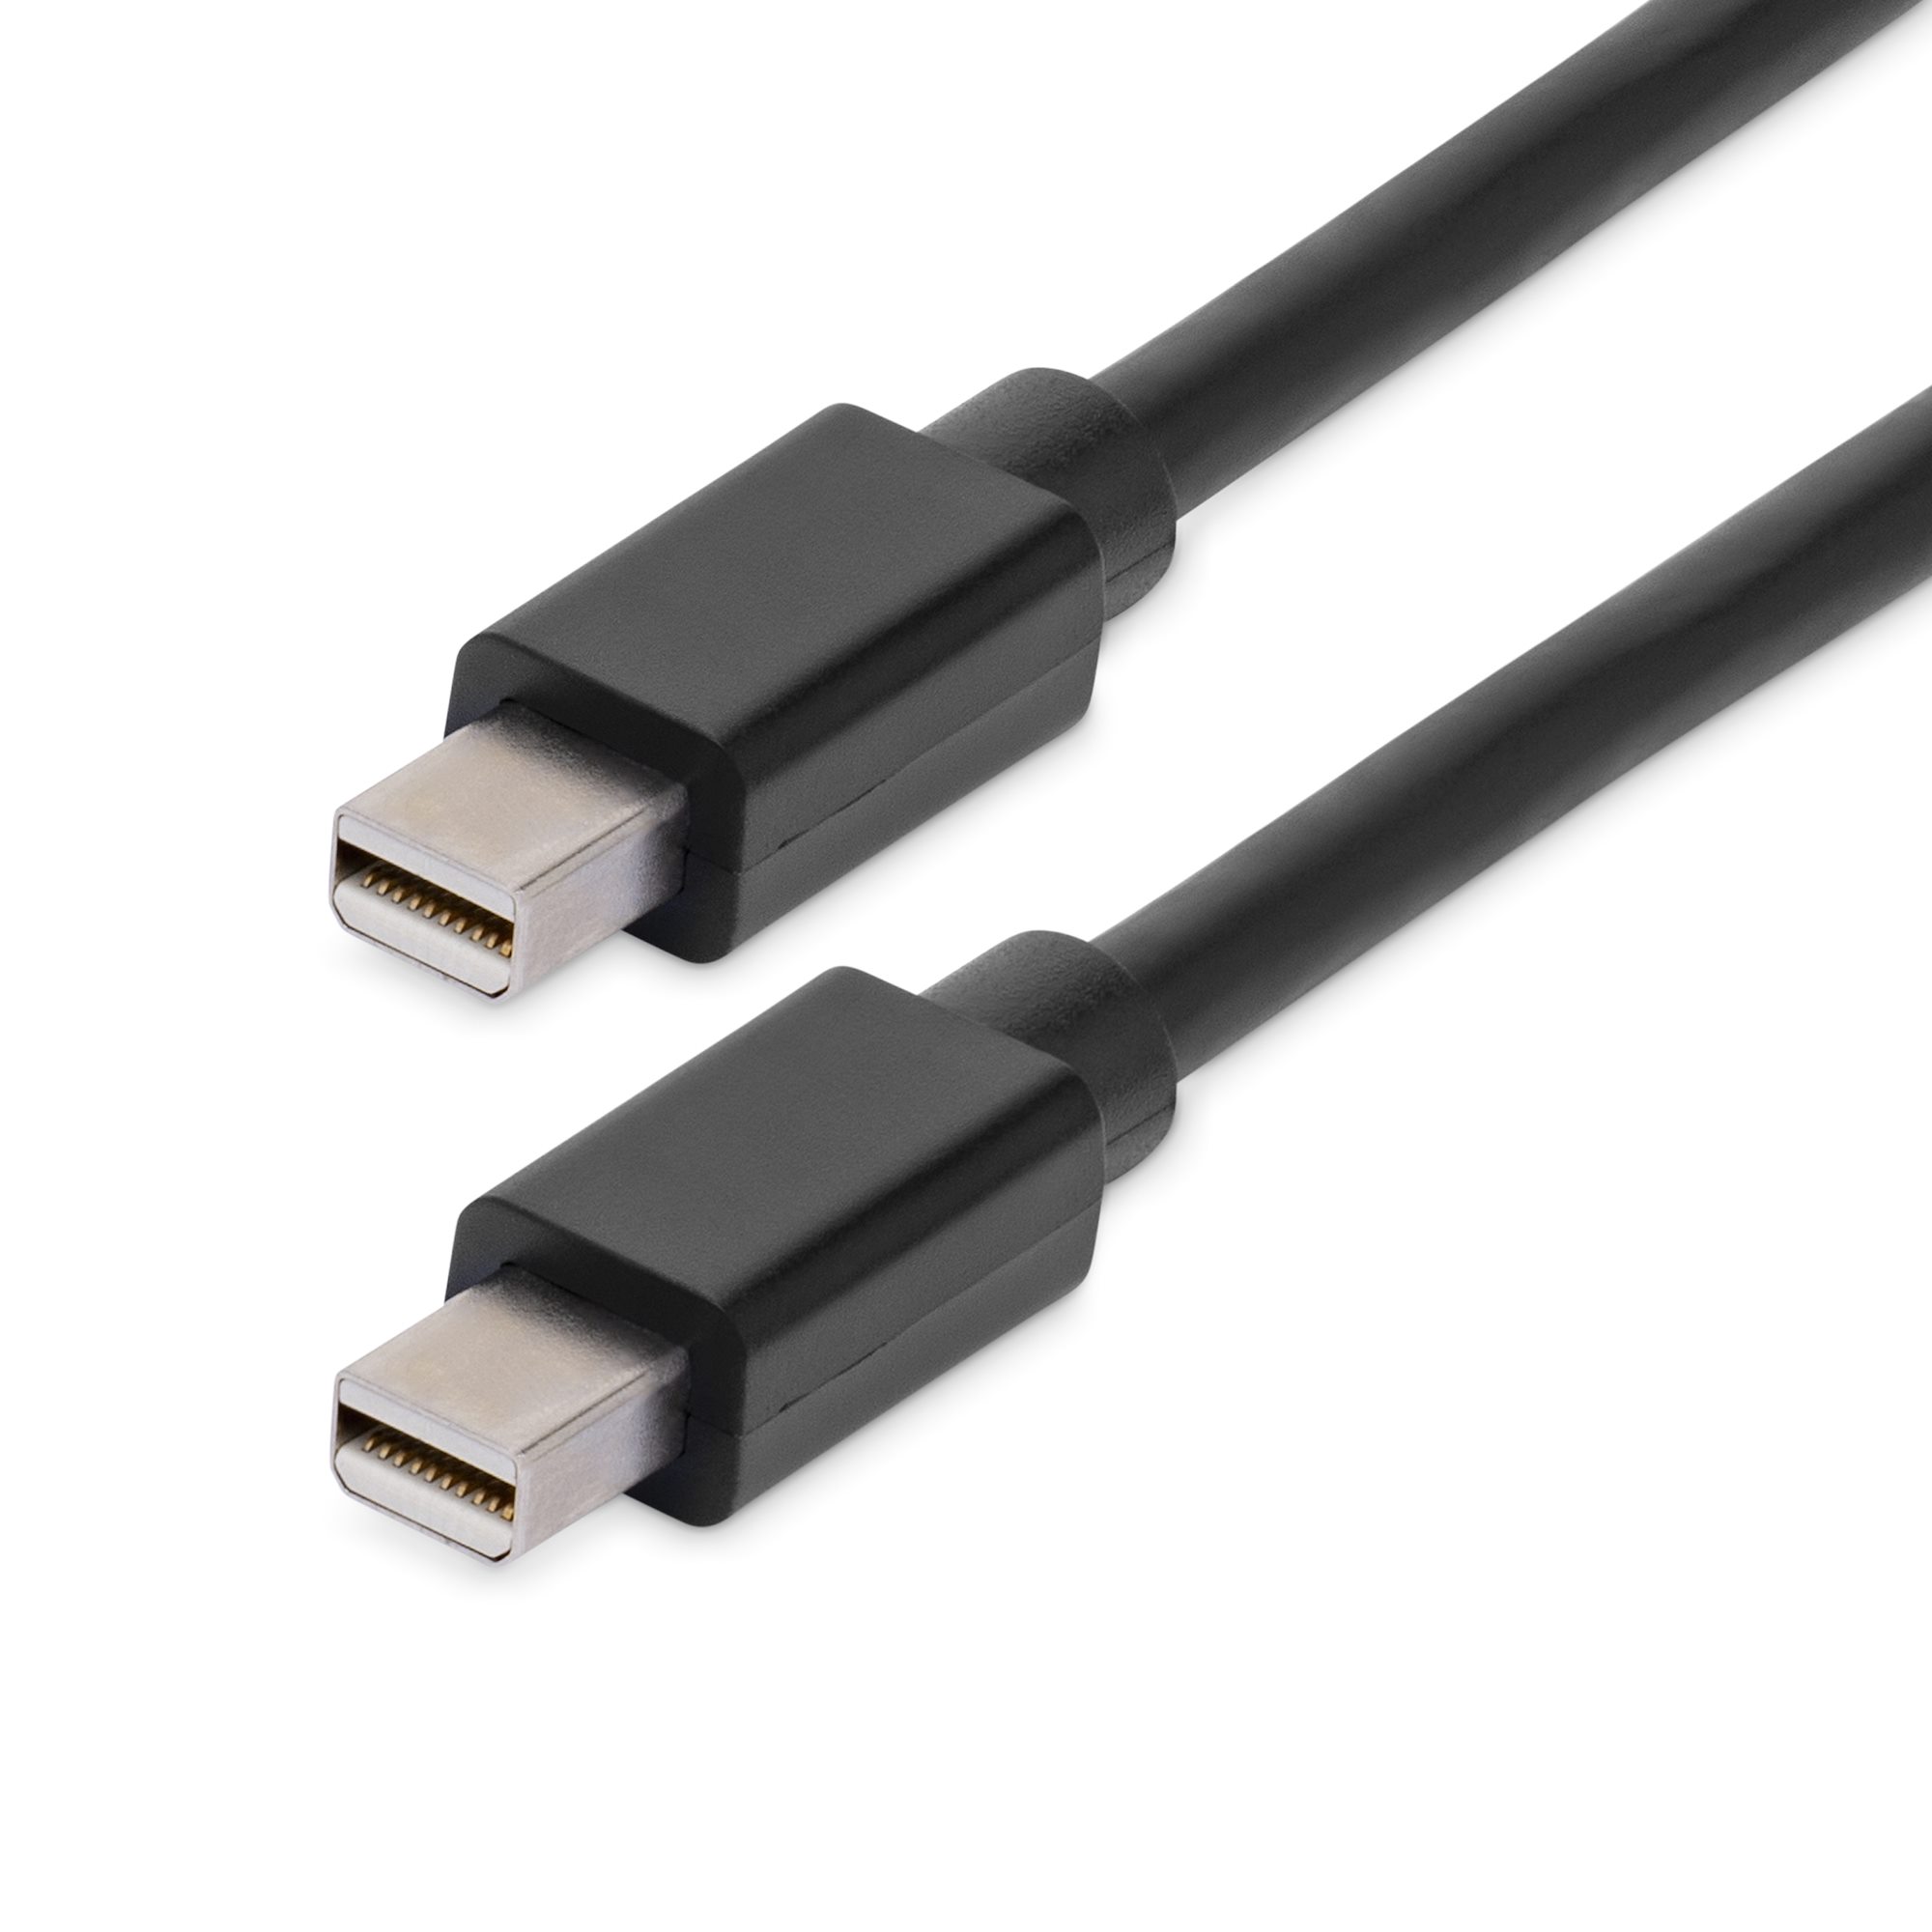 Thunderbolt 2 To Thunderbolt 2 Cable Mini Displayport Male To Male